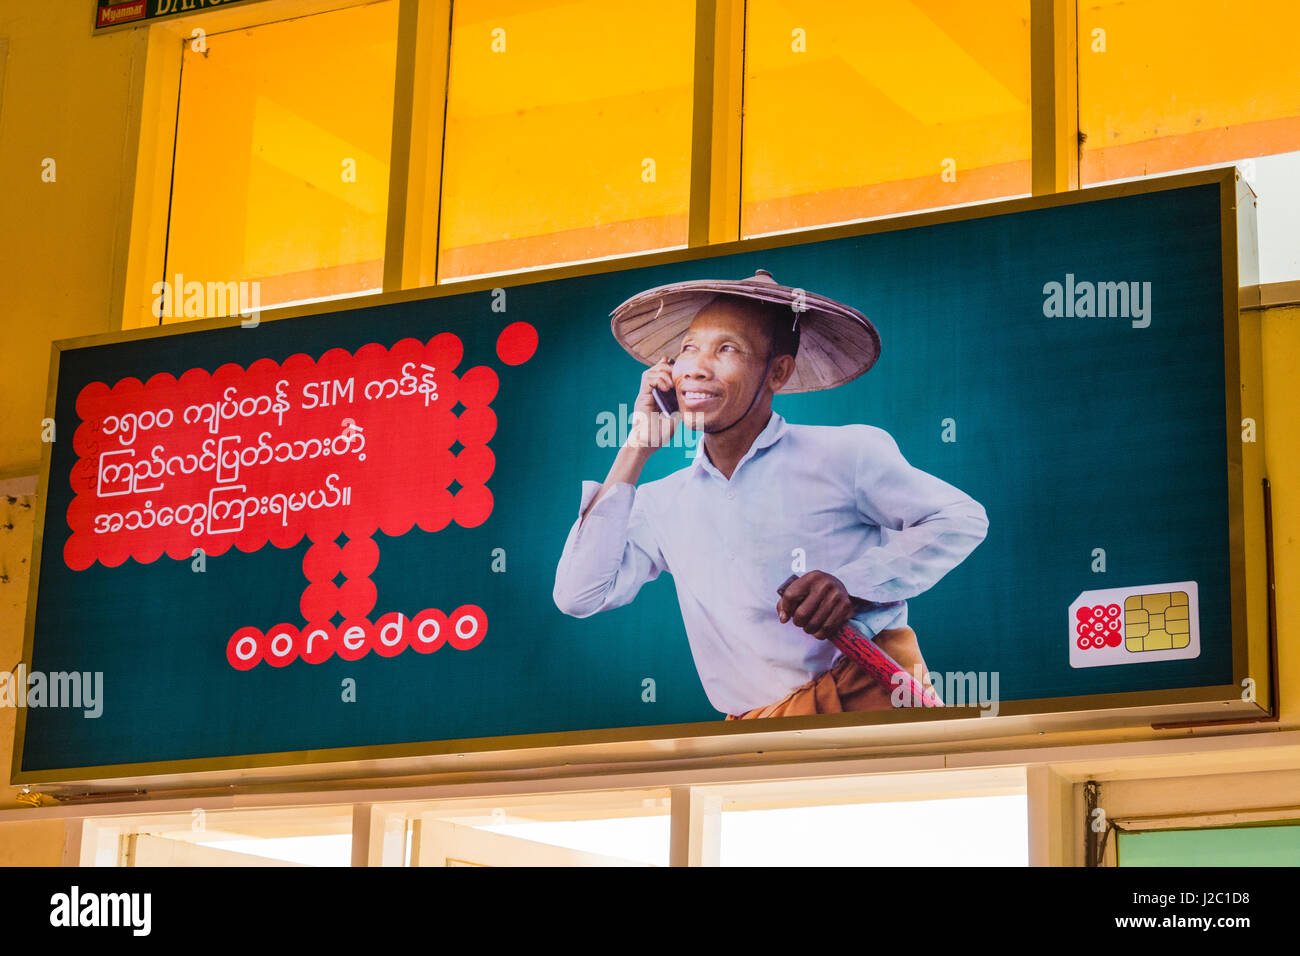 Myanmar. Shan State. Heho. Airport. Ad for Ooredoo sim cards. Stock Photo